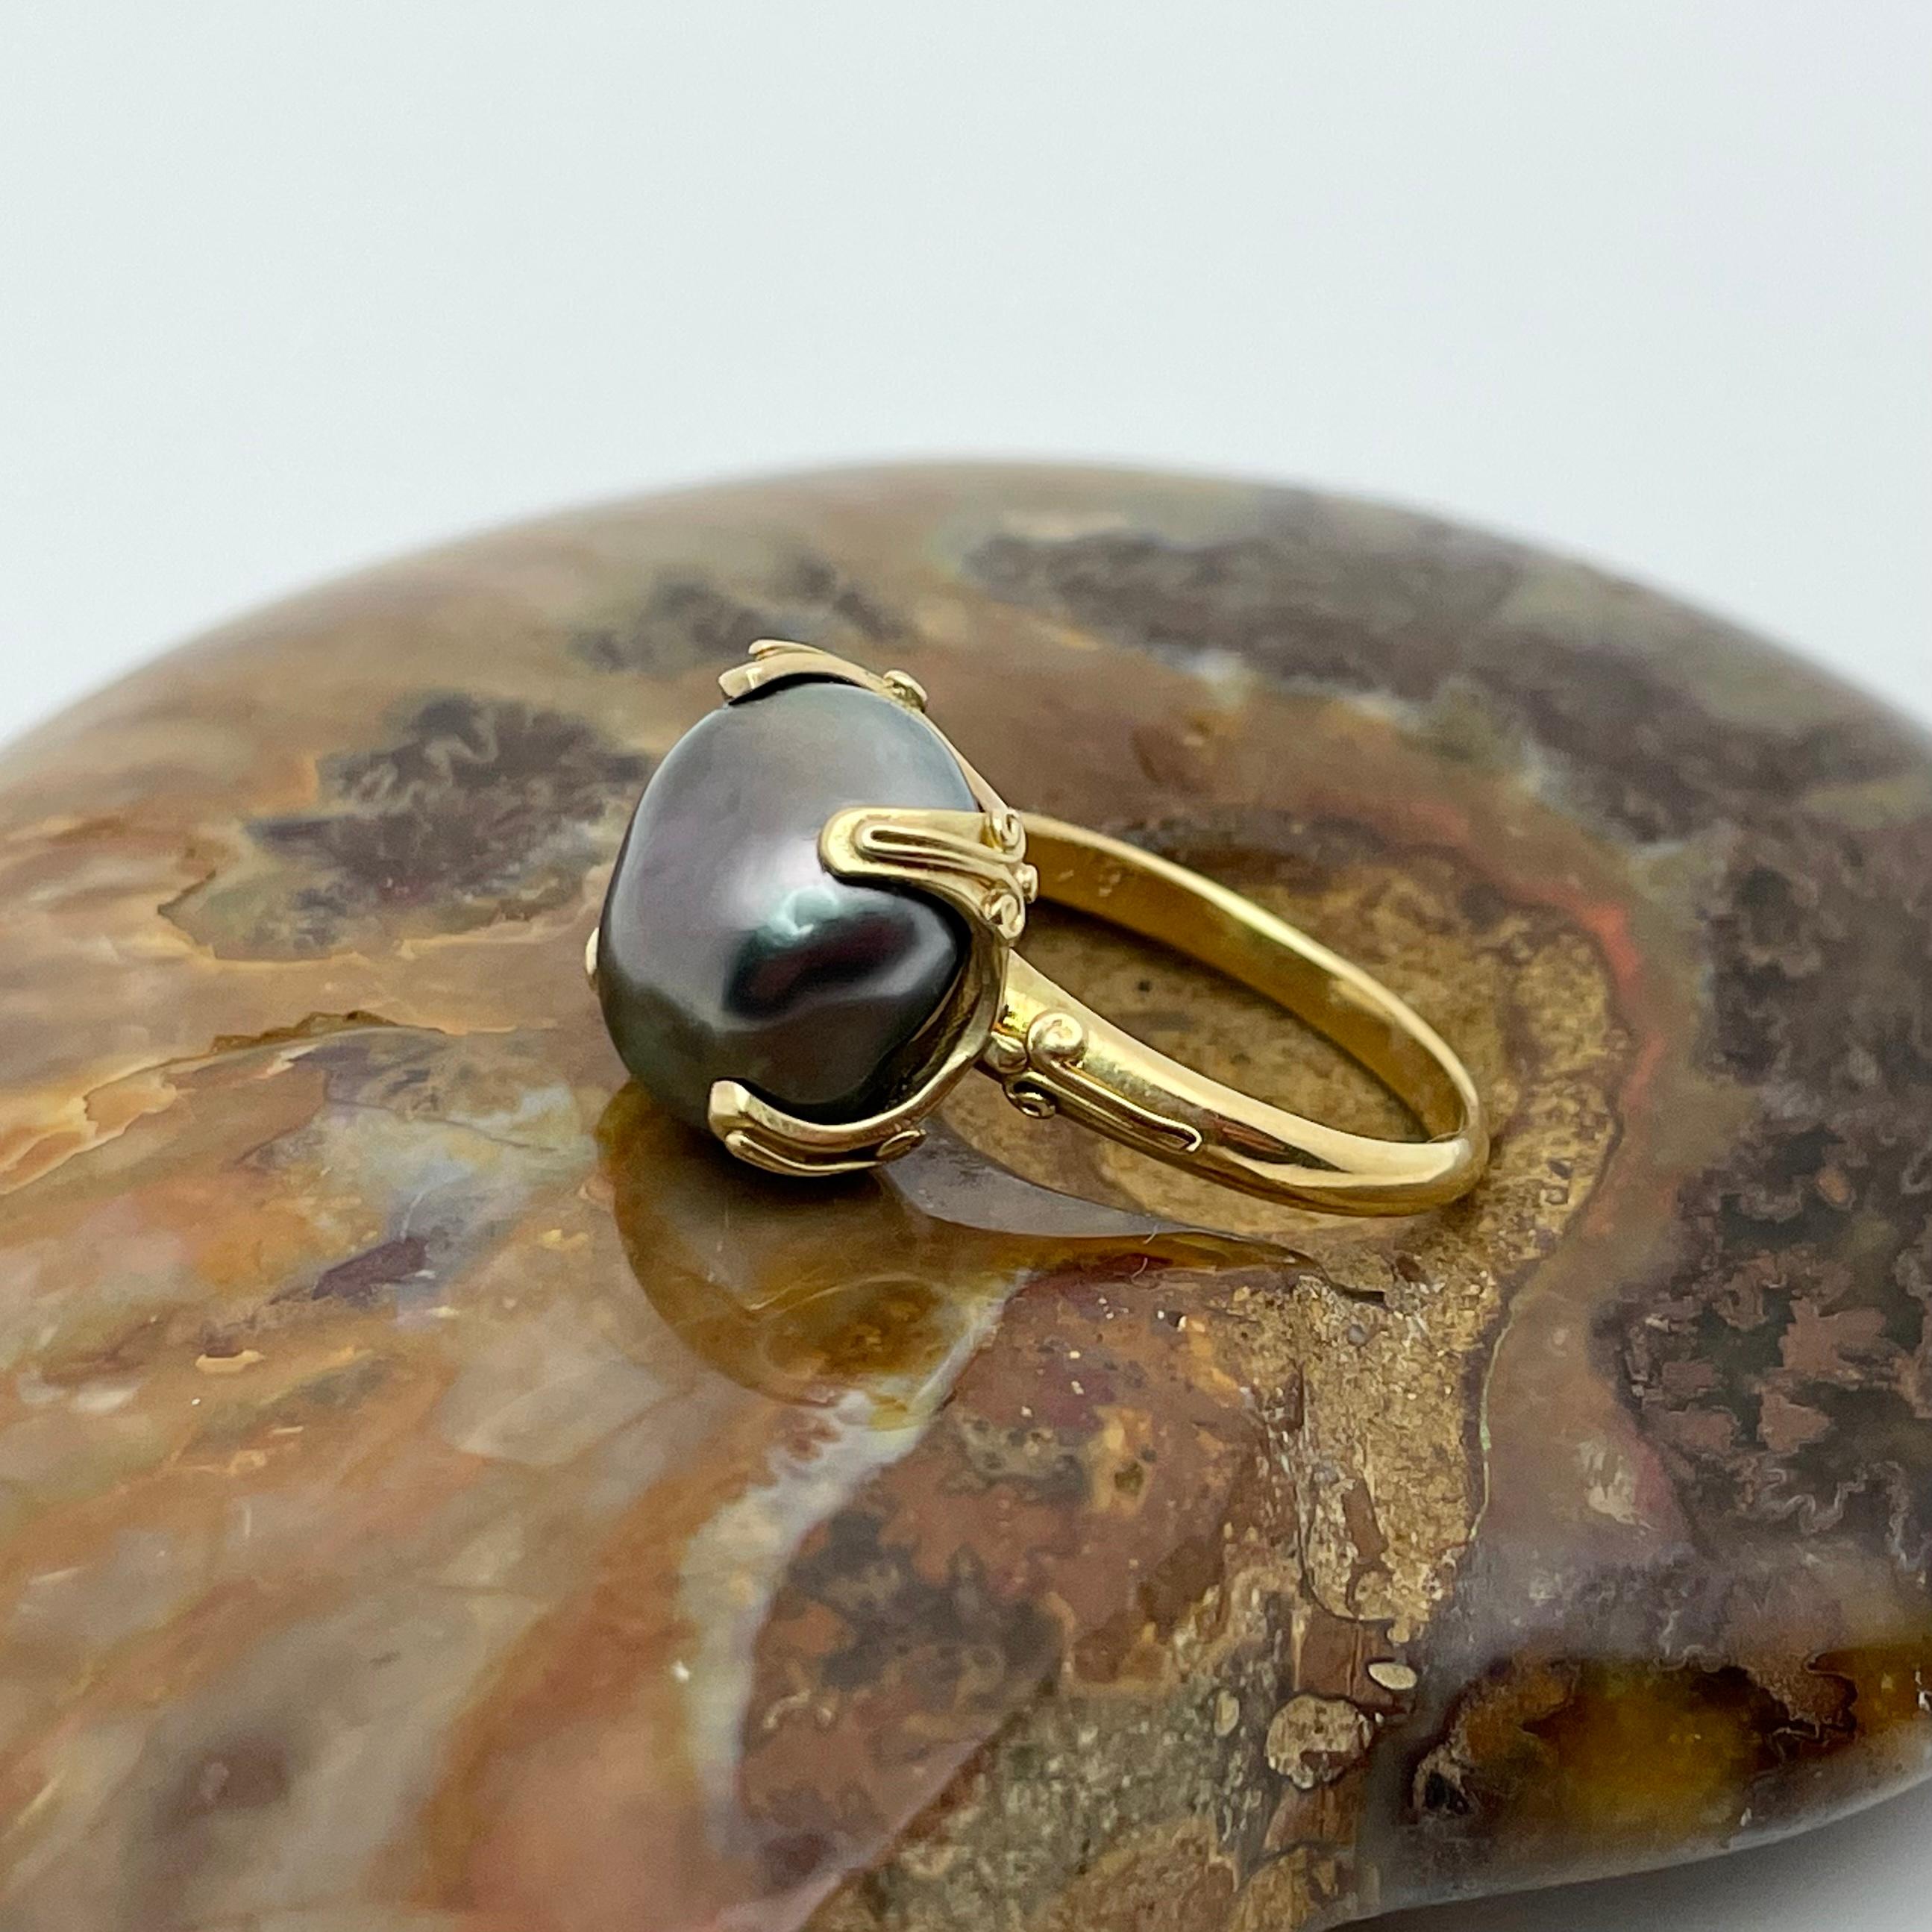 A lustrous slightly irregular shaped black south sea pearl is held in a handmade 4 corner embrace with small wire accents applied on the bezel and shank.  This ring is currently sized 6.5.  It is resizable. Delightfully unique!